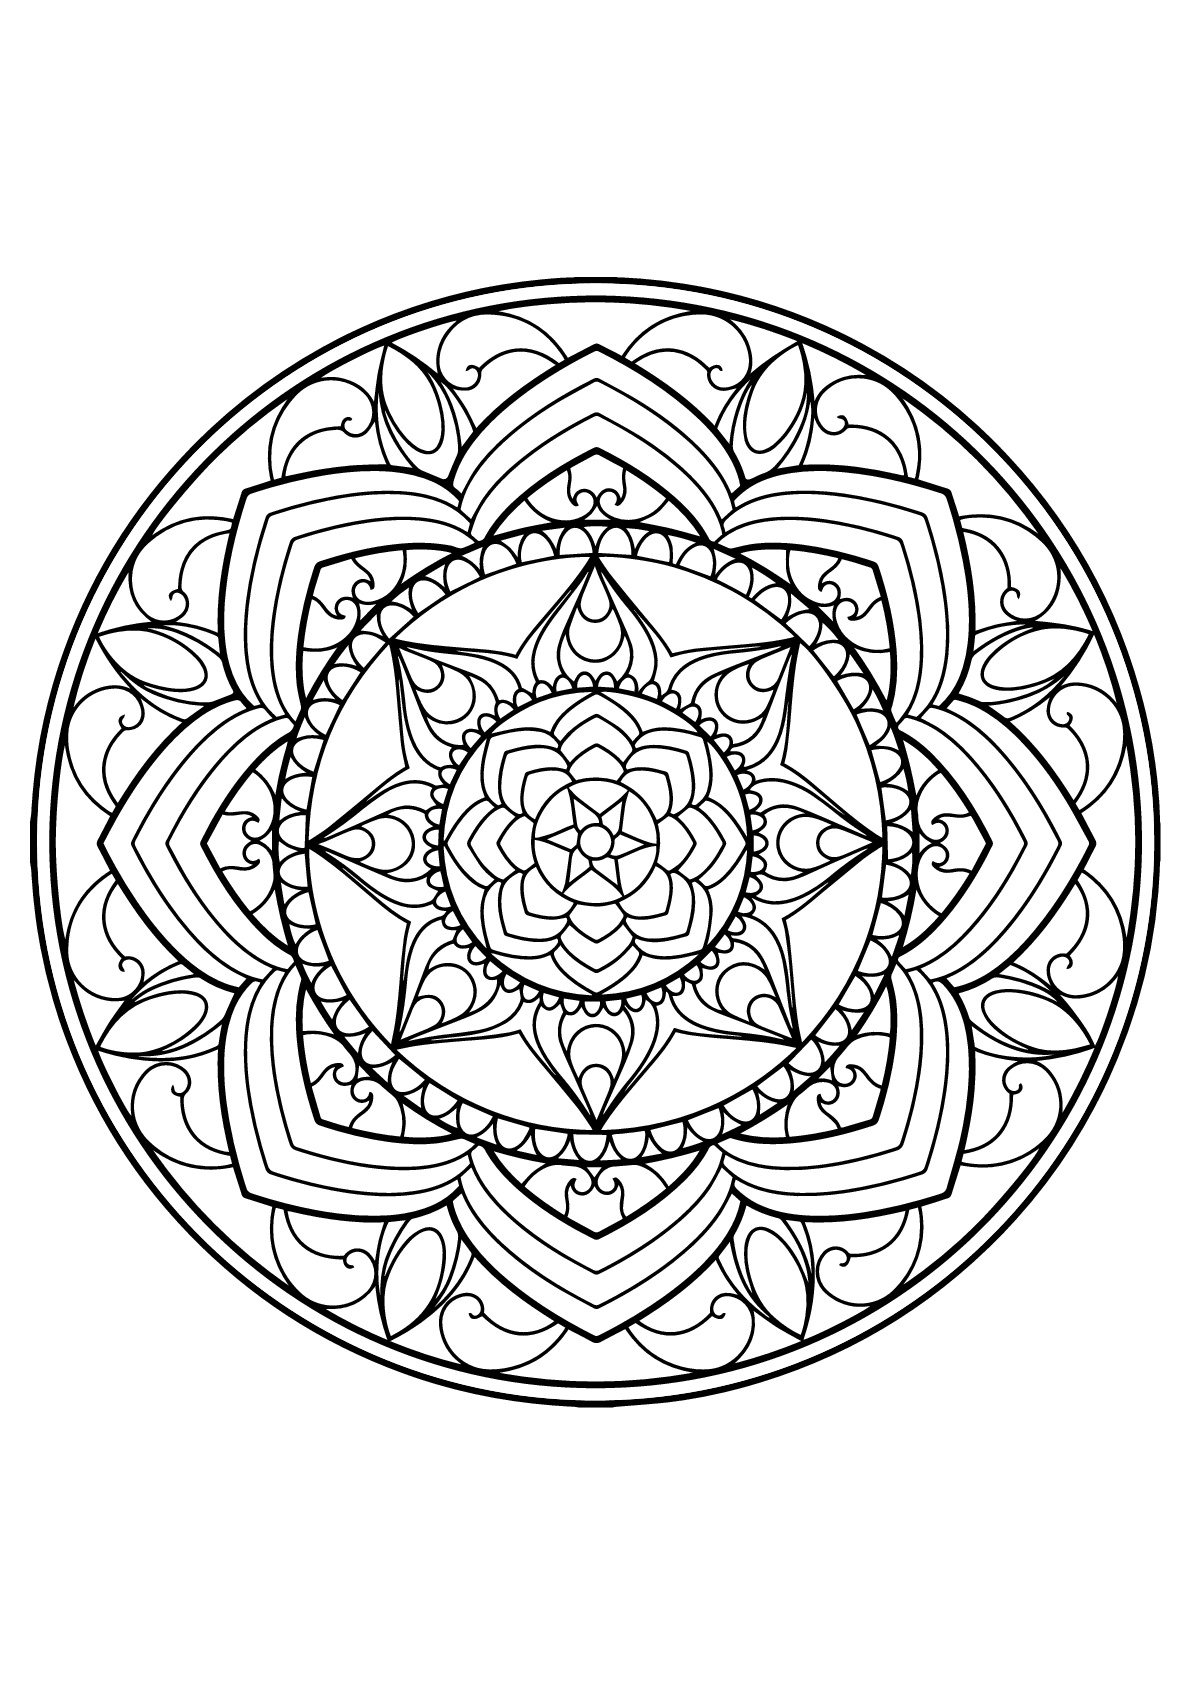 https://www.justcolor.net/wp-content/uploads/sites/1/nggallery/mandalas/mandala-from-free-coloring-book-for-adults-13.jpg